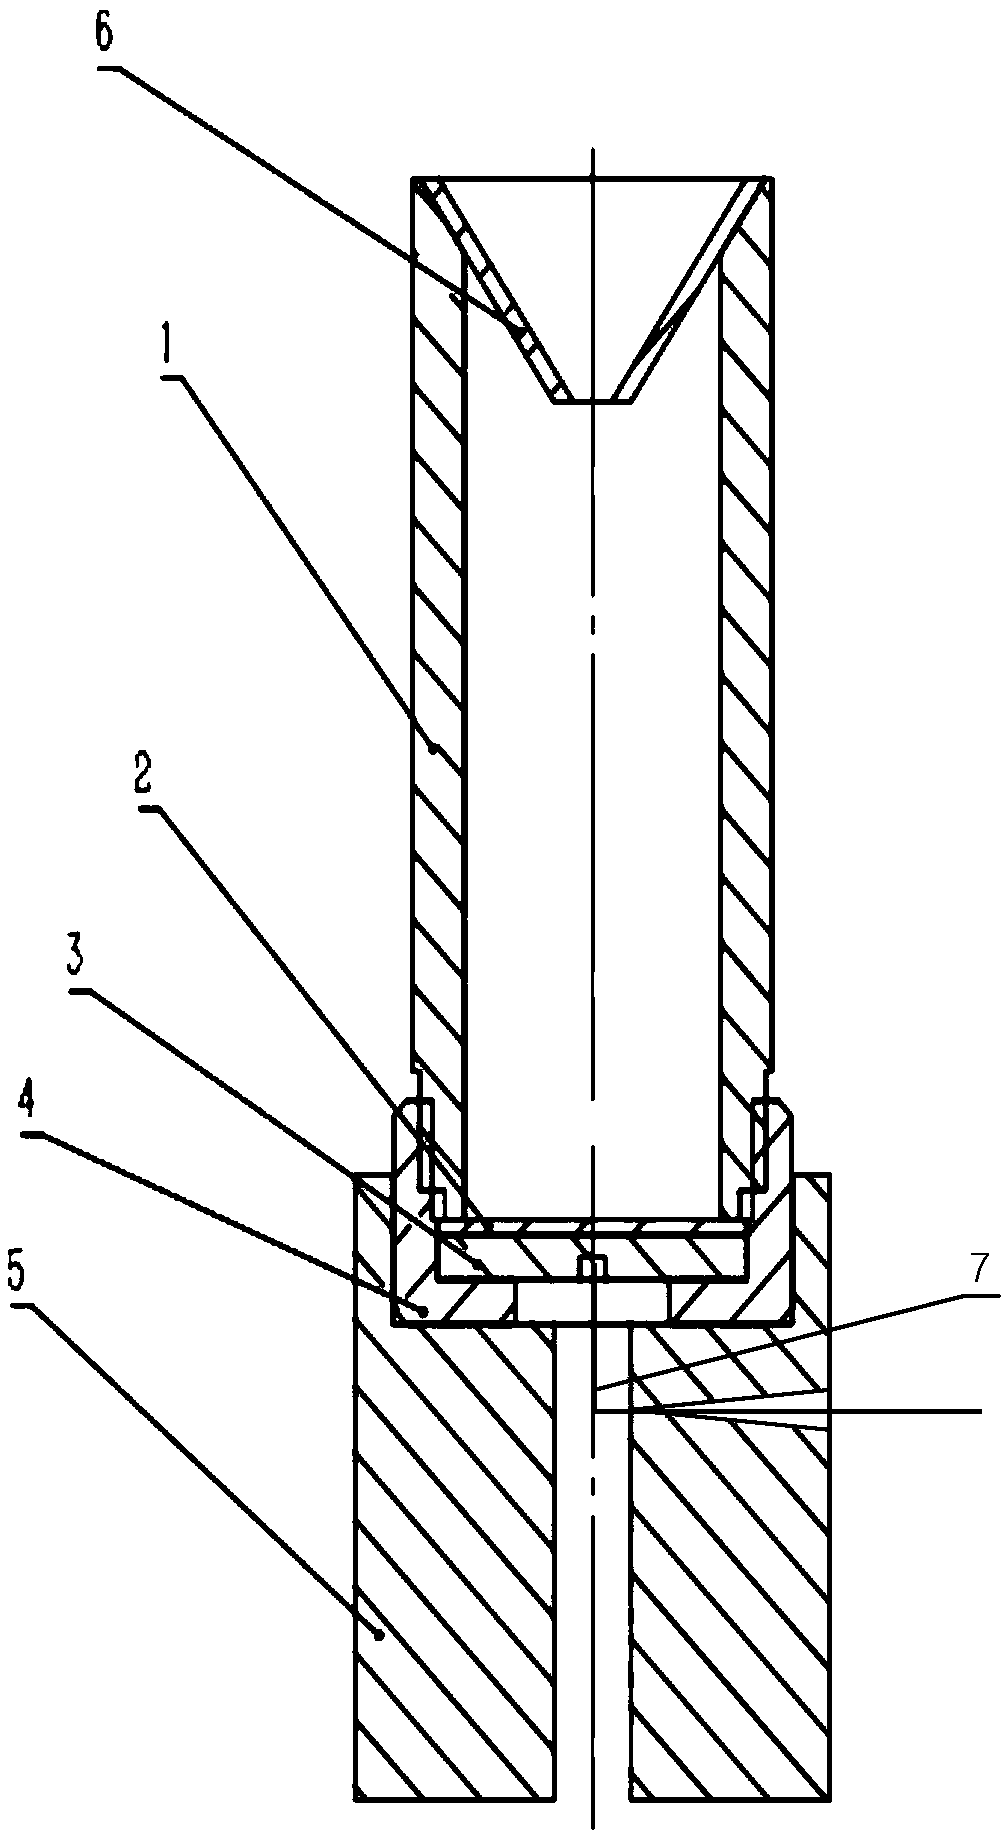 Deposition device for preparing high-resolution alpha radiation source by magnetohydrodynamic electrodeposition